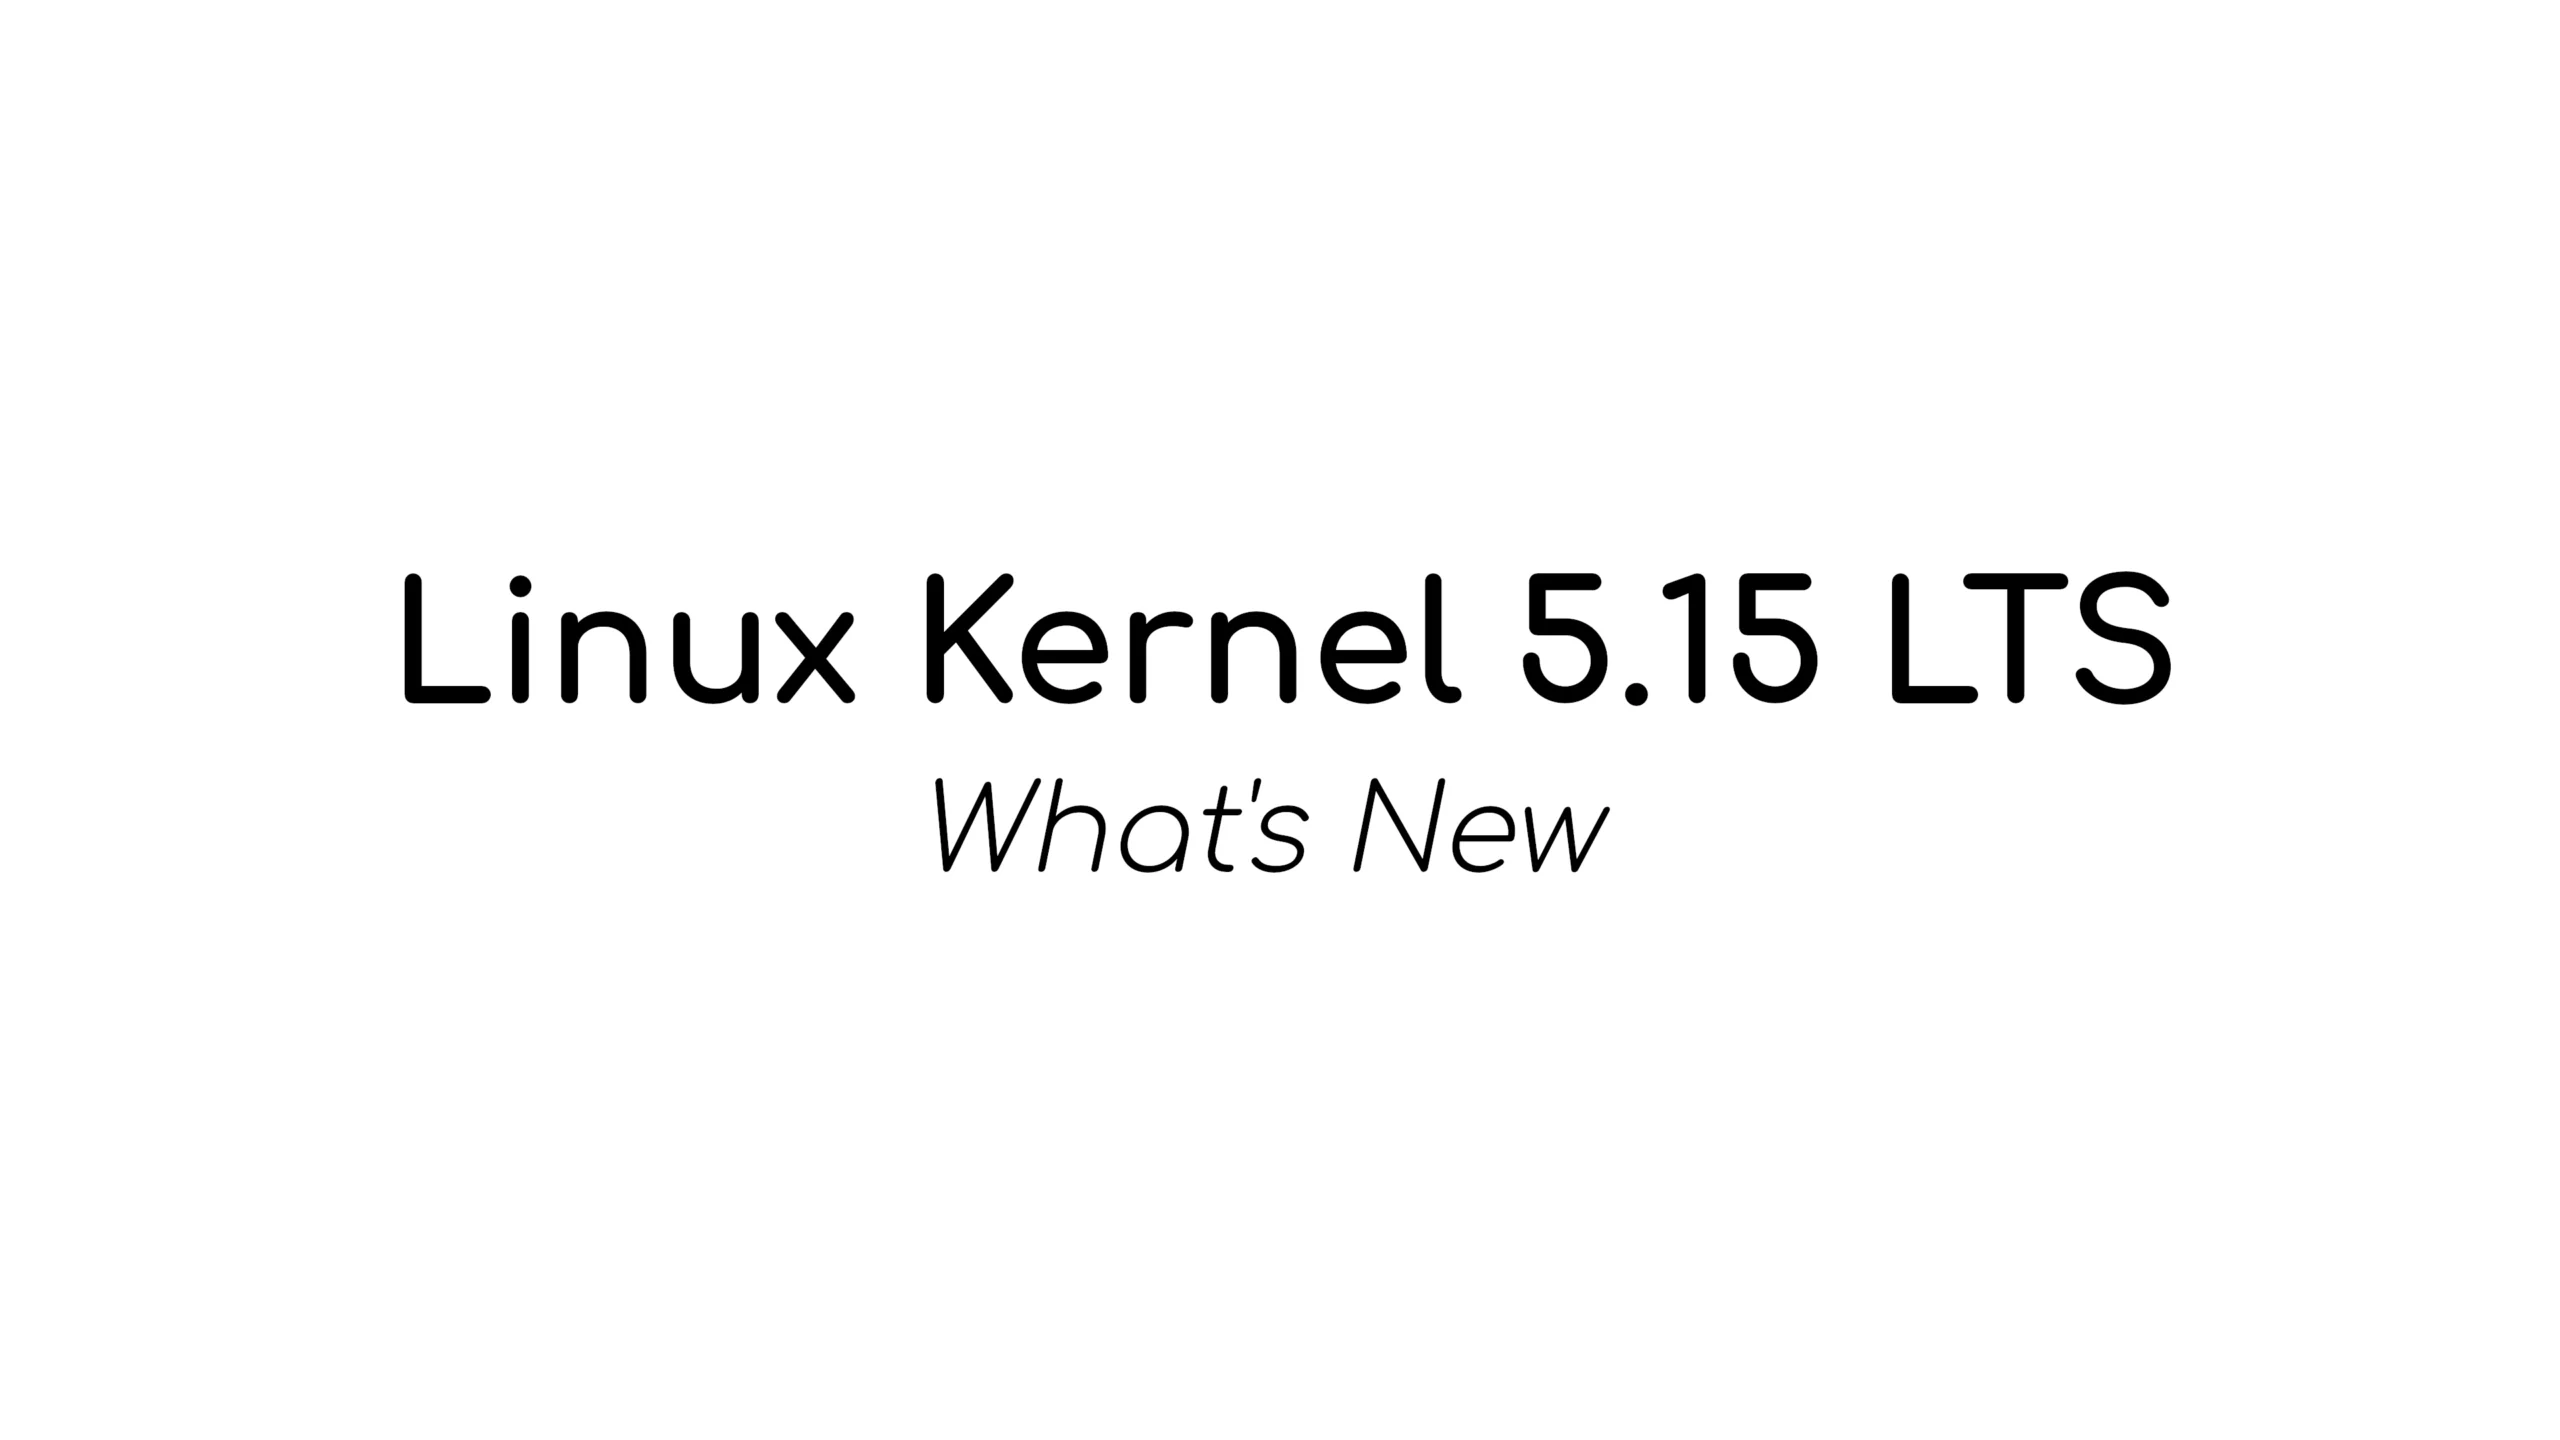 Linux Kernel 5.15 Released with New NTFS File System, In-Kernel SMB Server, and More